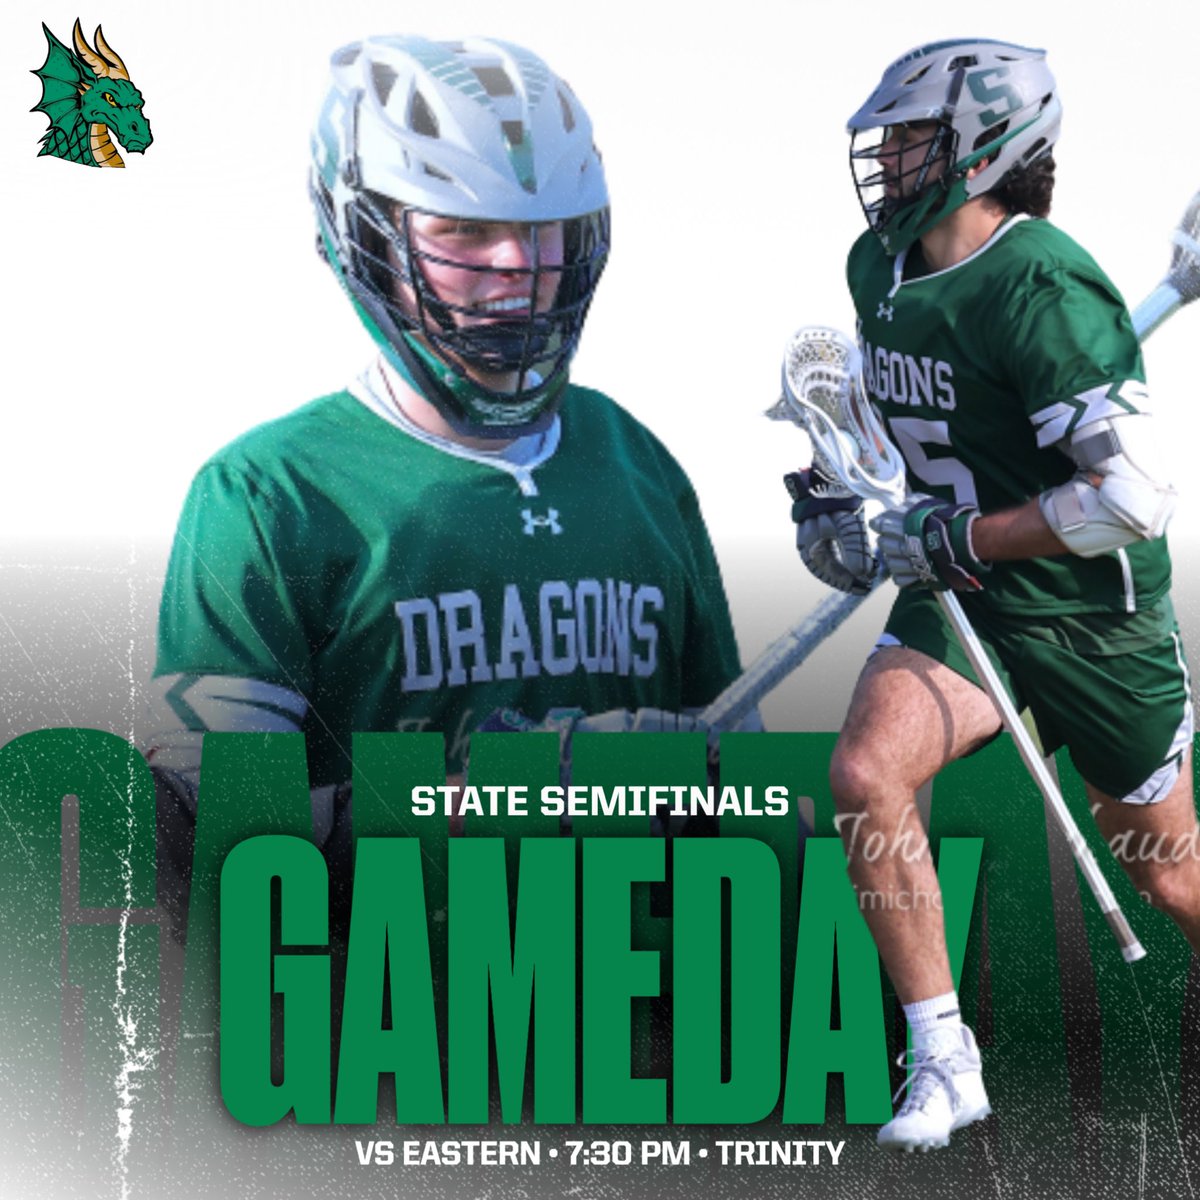 Final 4! Dragons take on Eastern tonight at Trinity!! 7:30pm Face-off. #southlax #wbd #LND #reloadrepeat #rentisdue #payday #greenmachine #ΣΟΕ